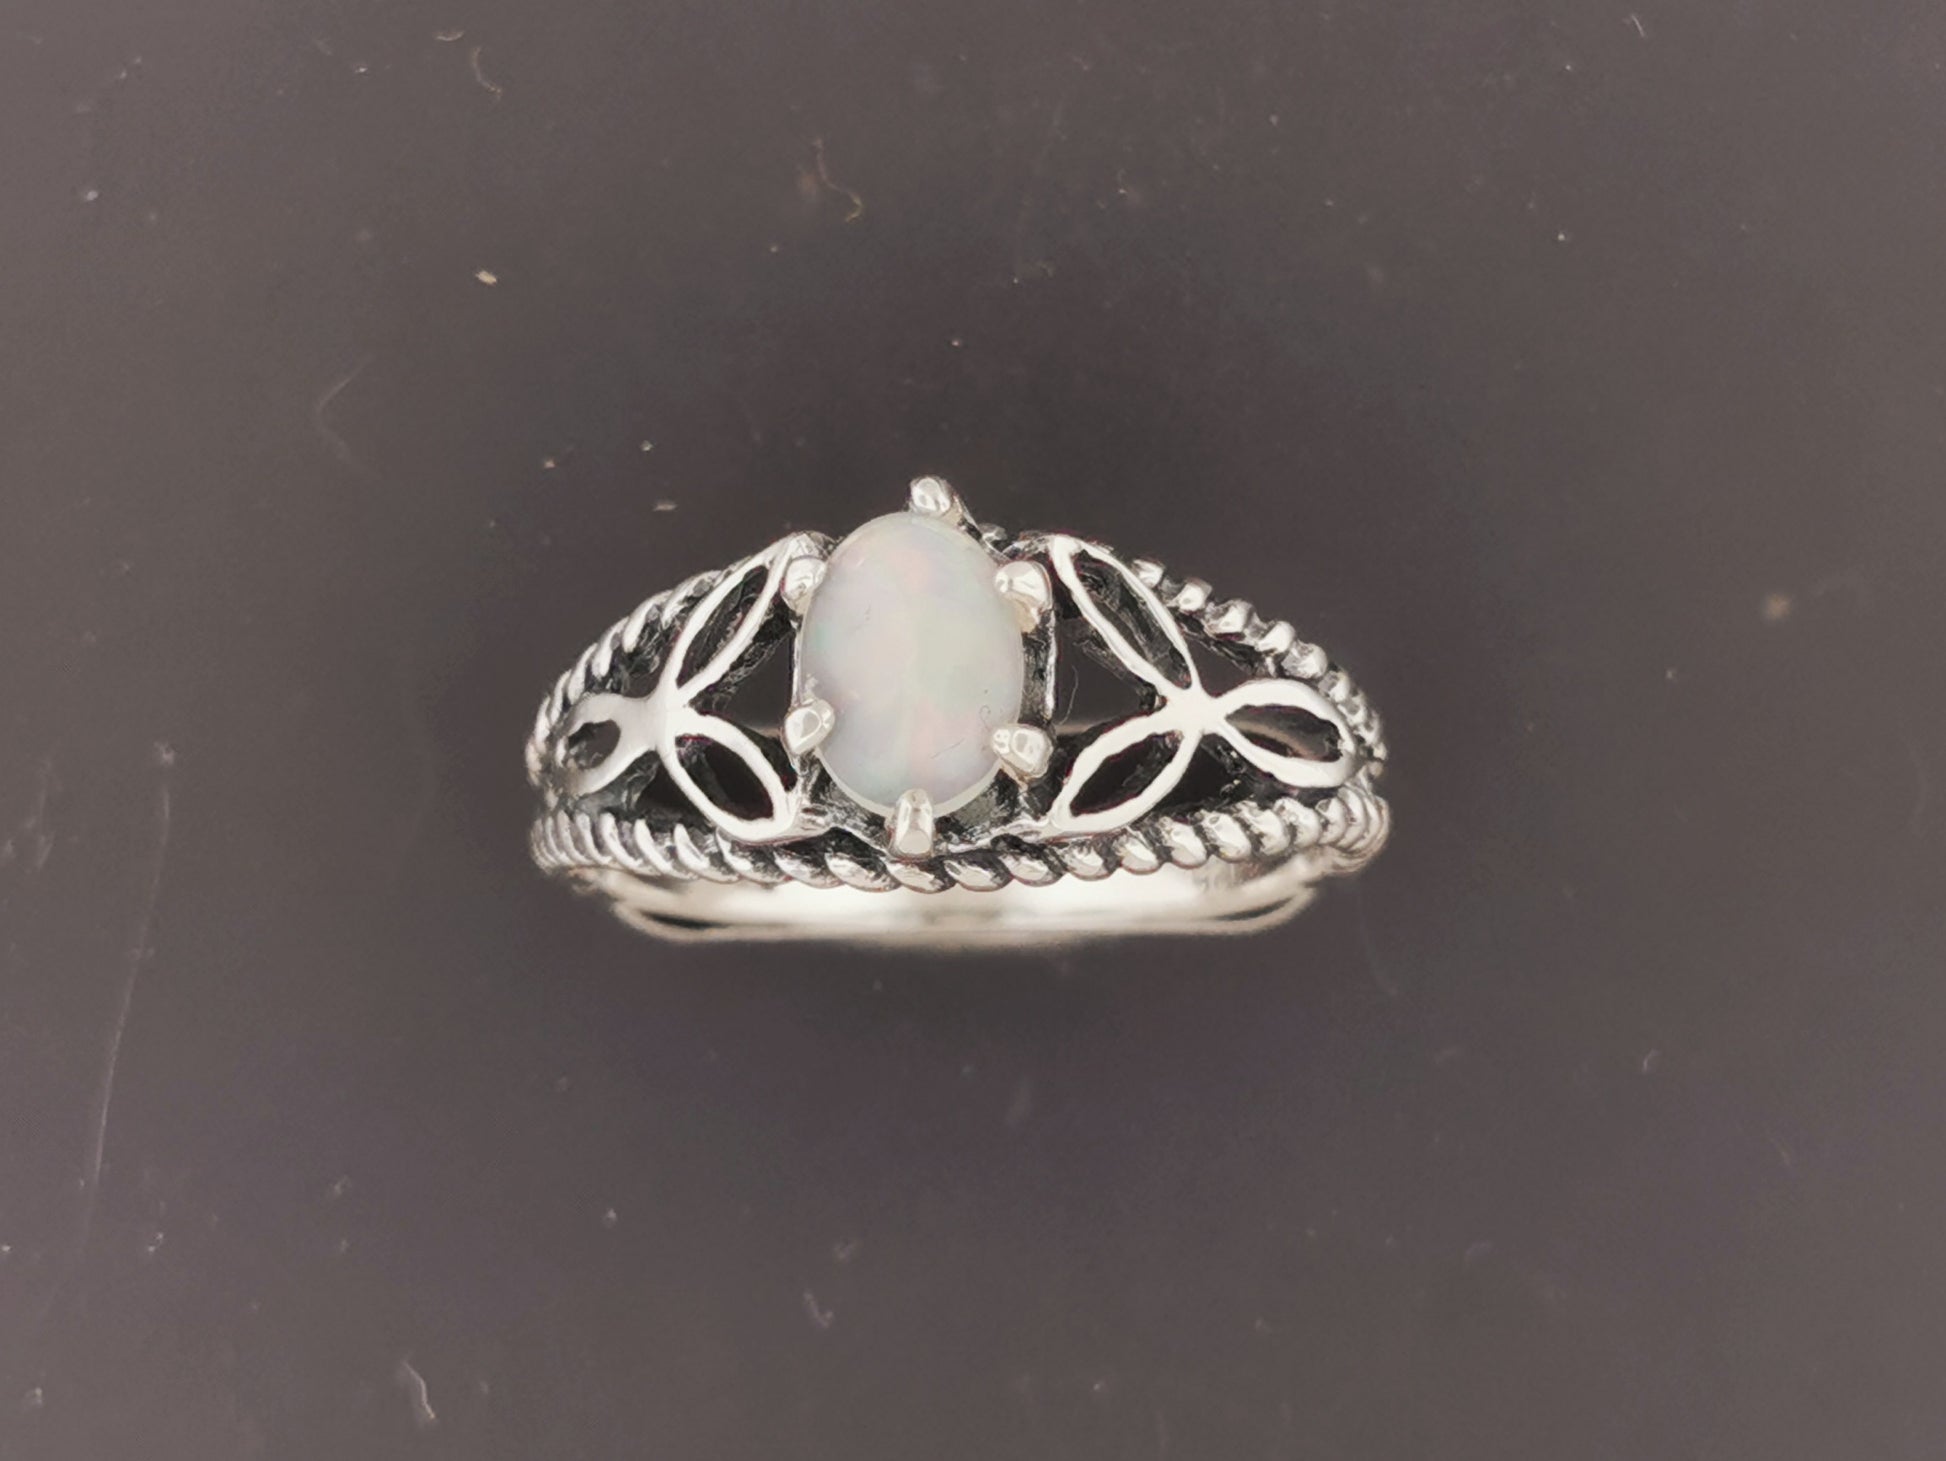 Celtic Triquetra Knotwork Gemstone Ring in Sterling Silver, Celtic Knot Silver Gemstone Ring, Custom Birthstone Engagement Ring, Silver Triquetra Ring, Celtic Silver Ring, Celtic Promise Ring, Celtic Gemstone Ring, Irish Sterling Silver Gemstone Ring